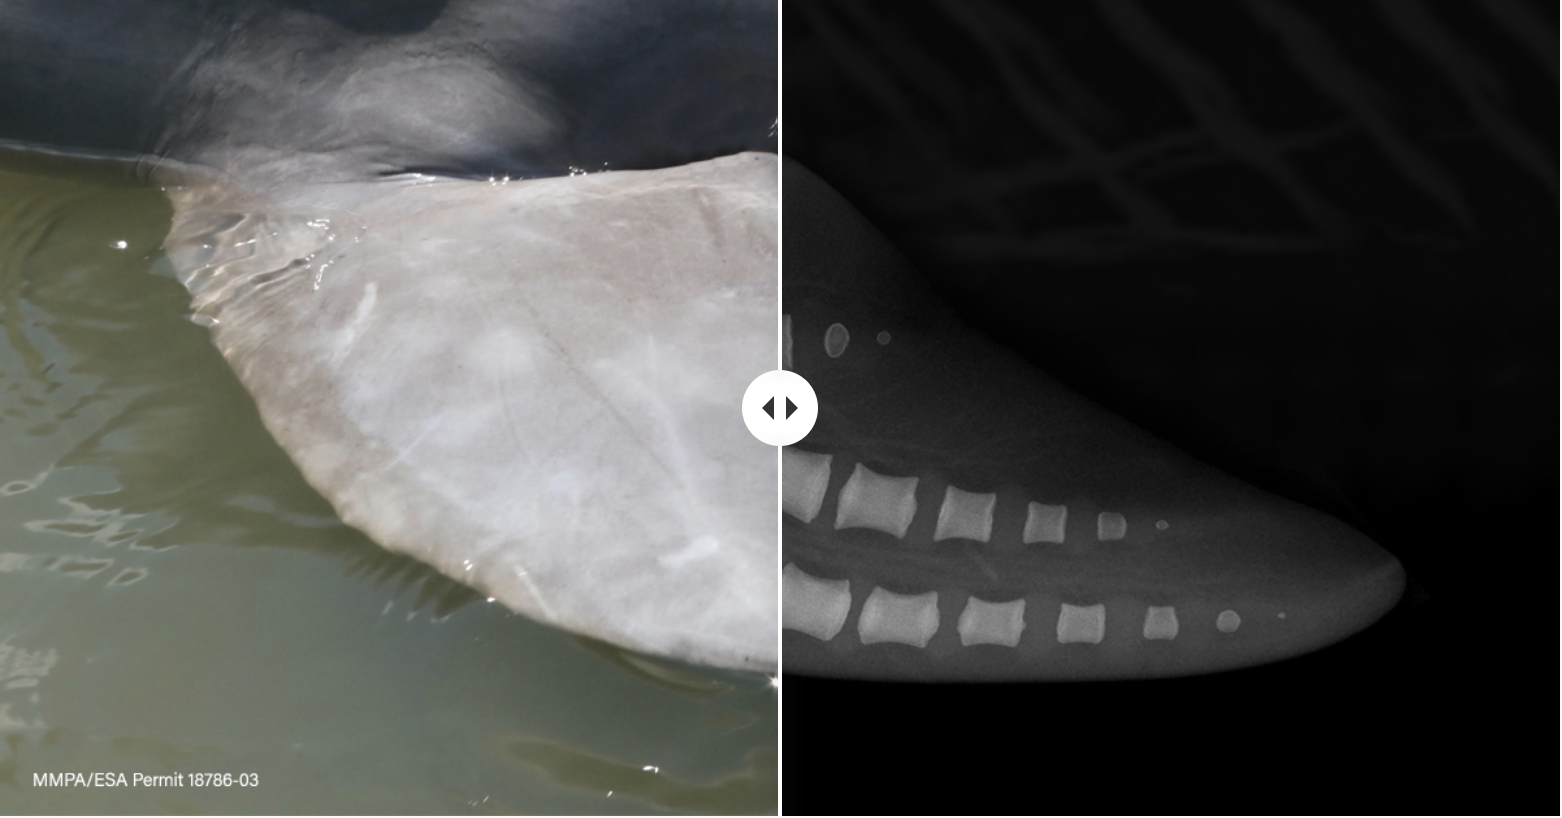 An external x-ray image on the left, and an internal x-ray image on the right showing a dolphin's flipper. 